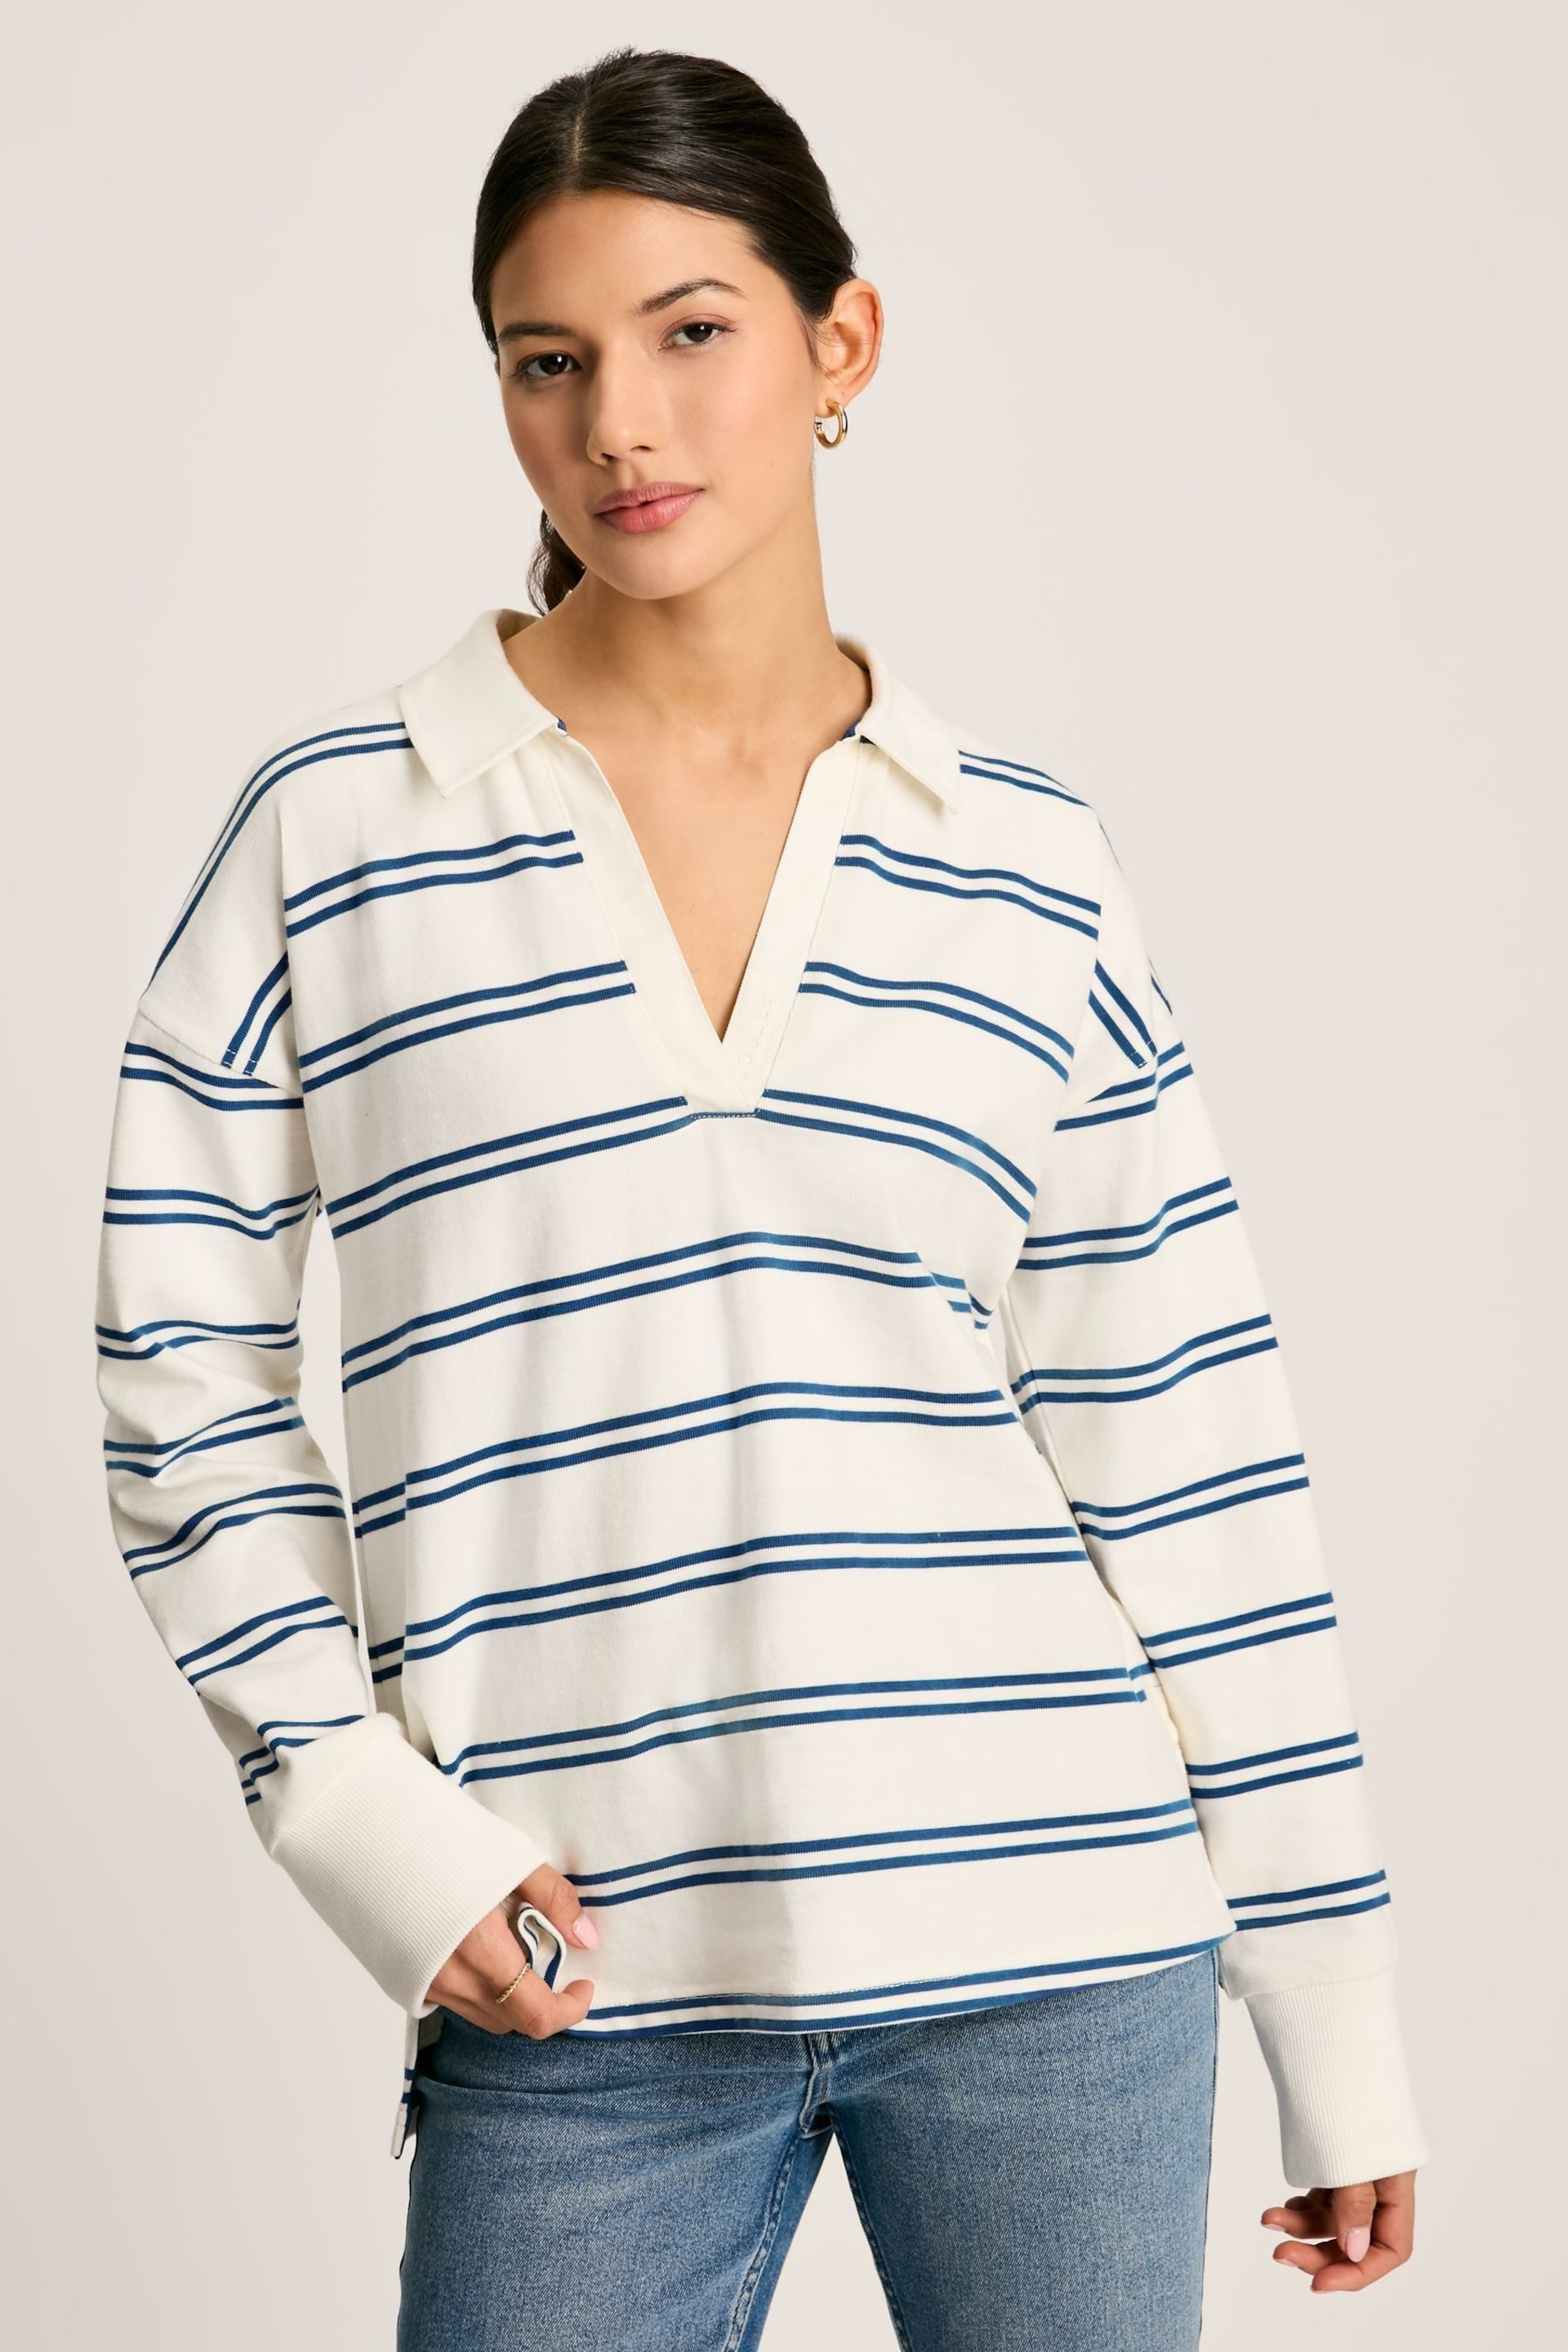 Joules Bayside Cream/Navy Cotton Deck Shirt - Image 1 of 7